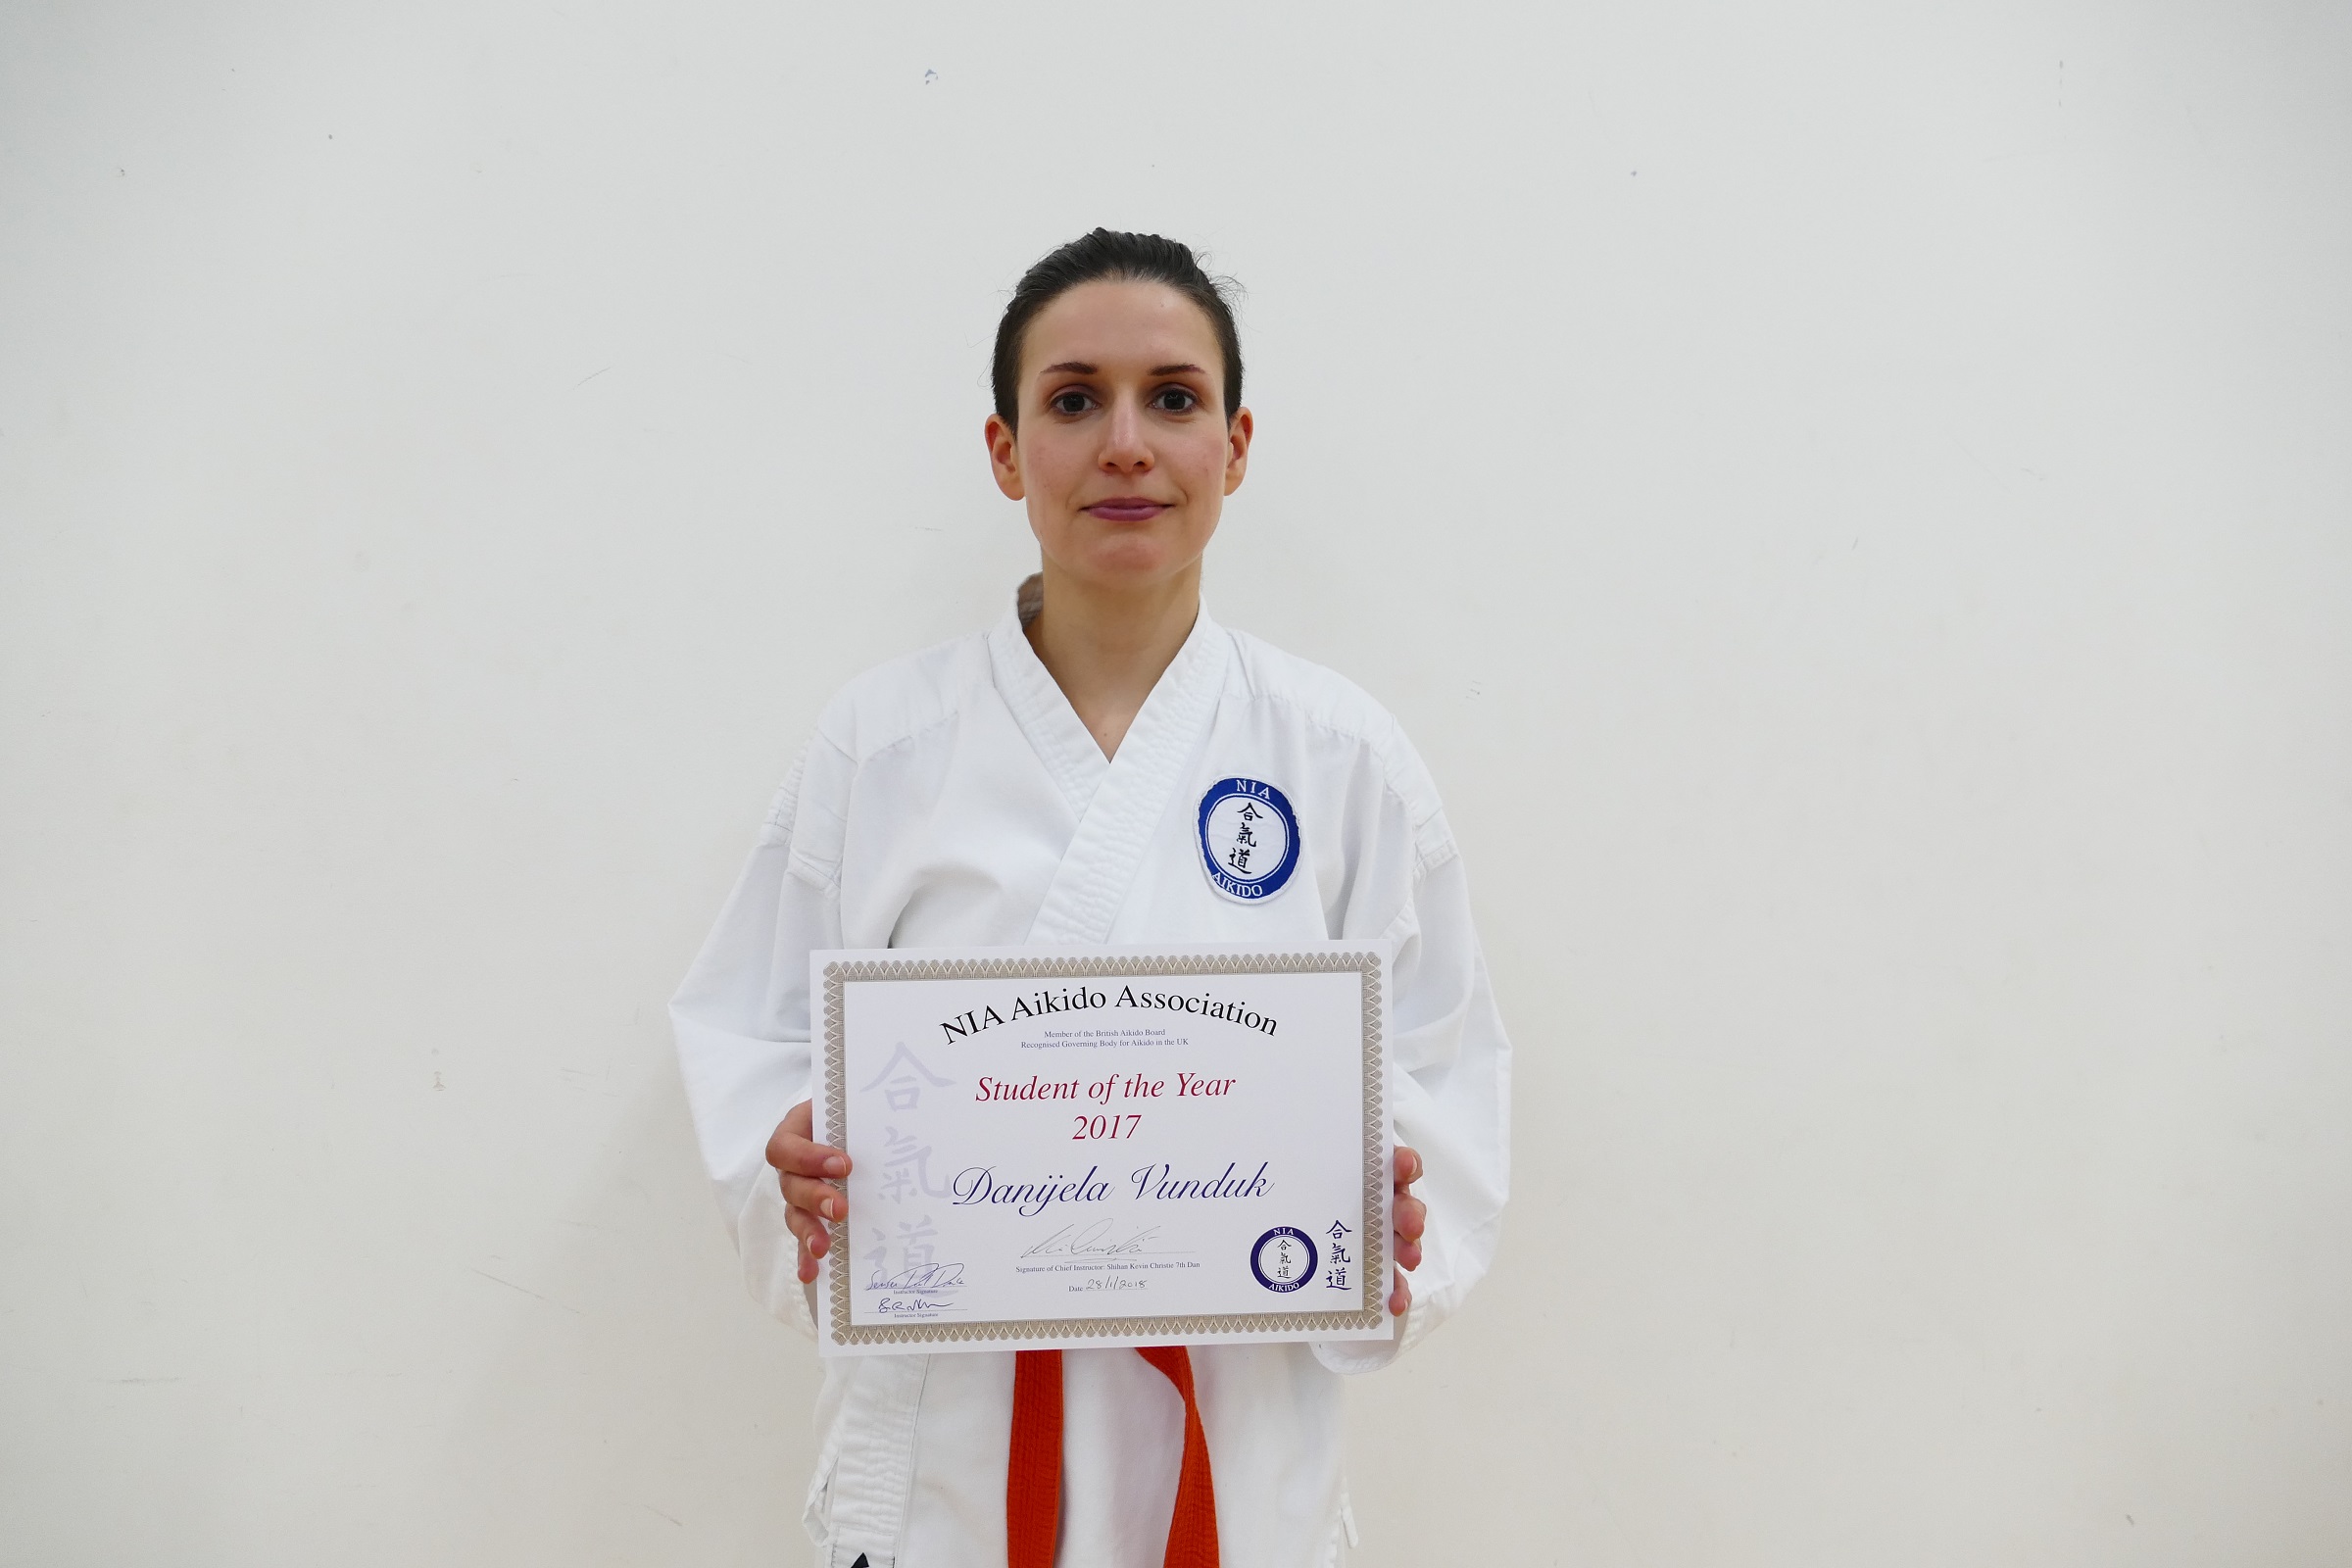 NIA Aikido Student of the Year 2017